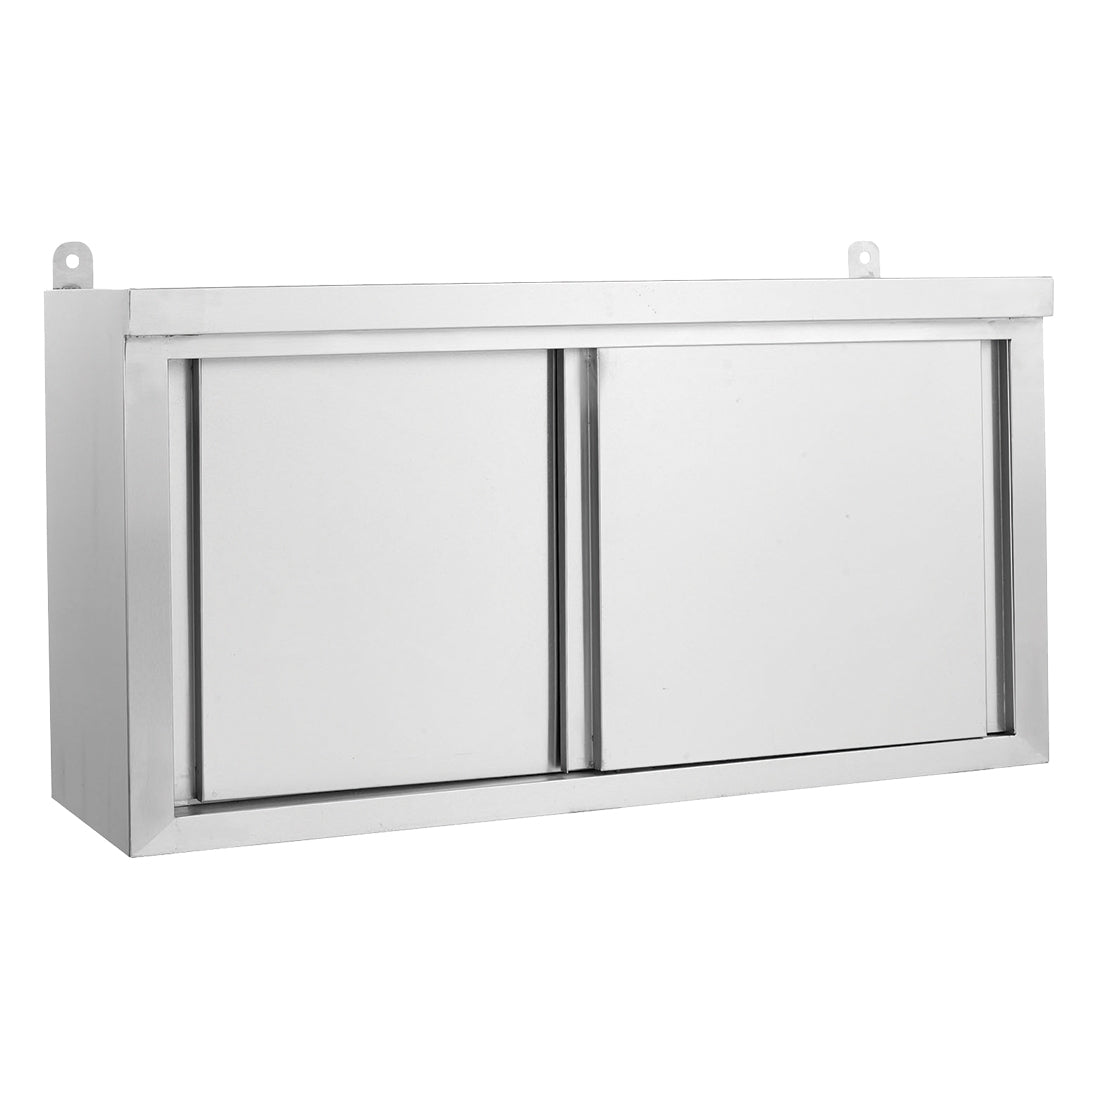 Stainless Steel Wall Cabinet – WC-1200 - Cafe Supply